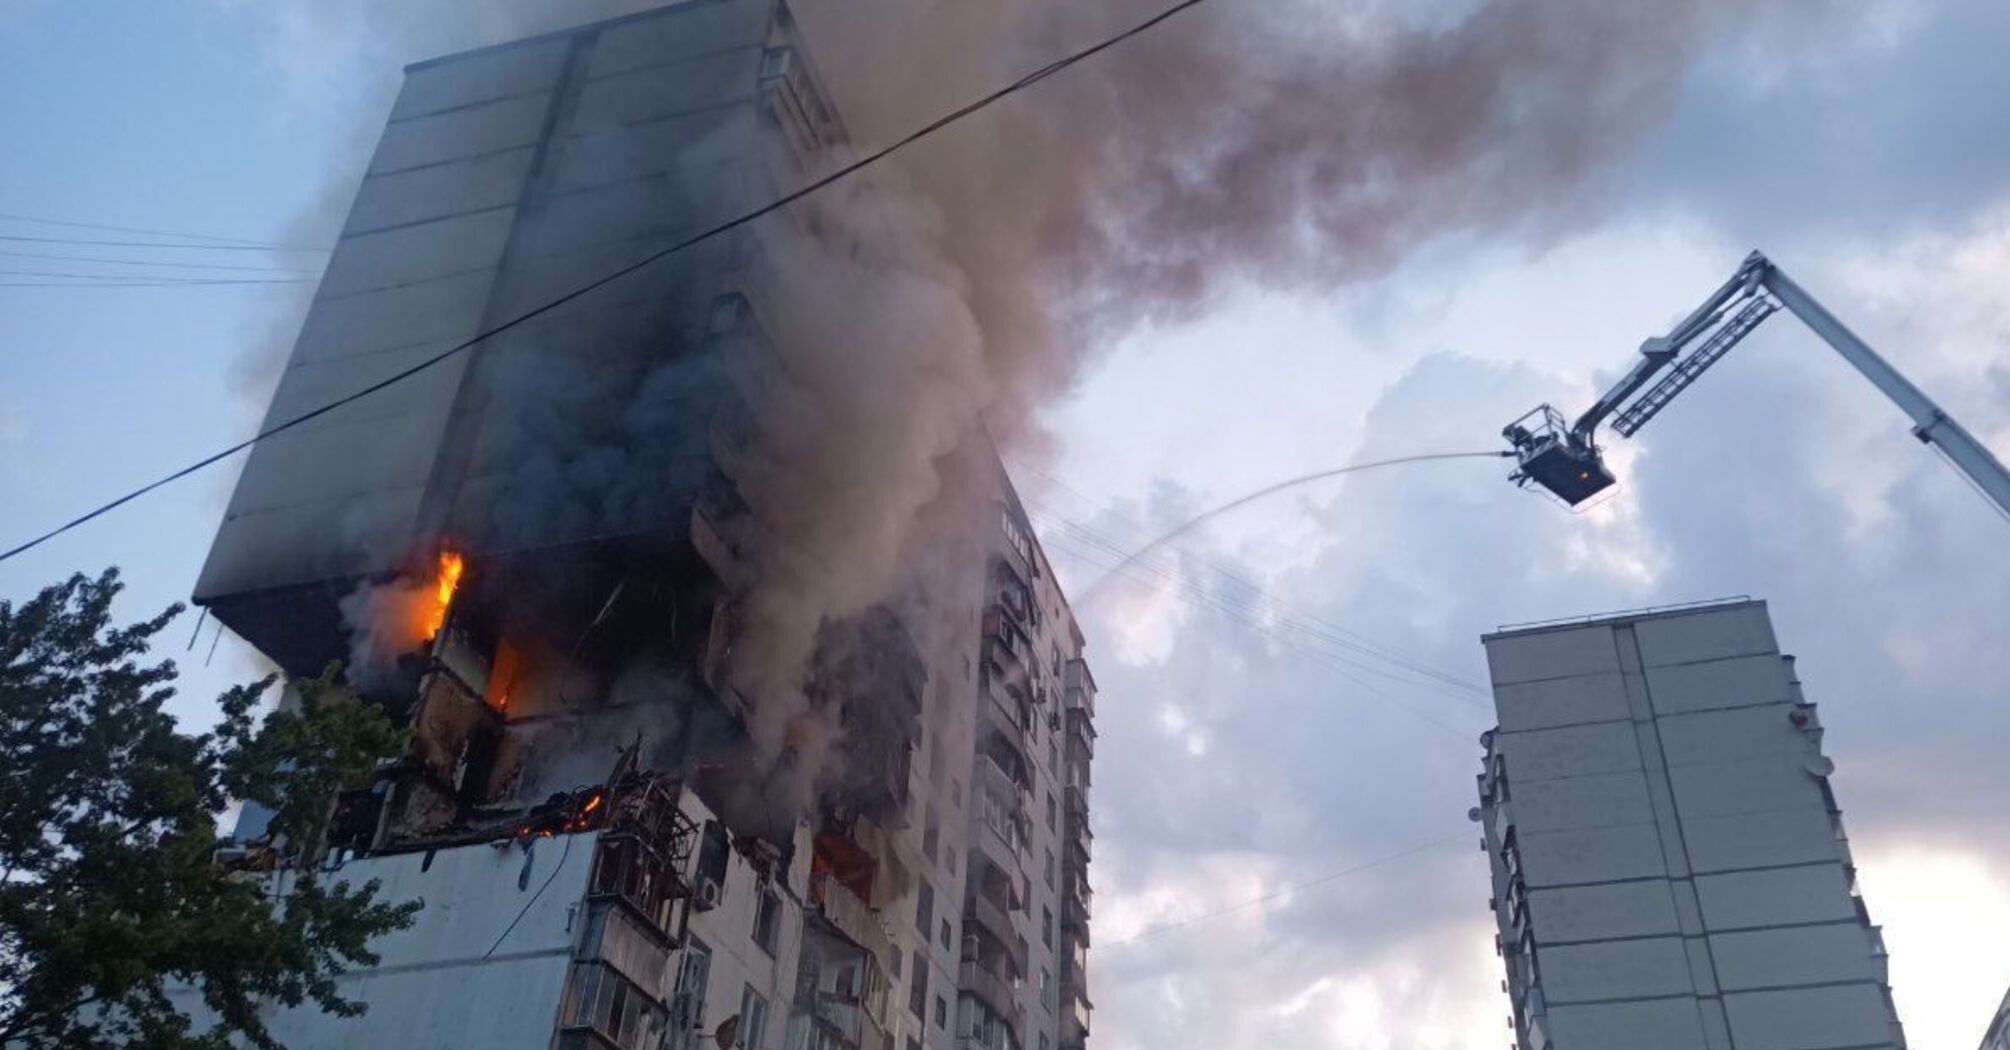 Gas explosion in a 16-storey building in Kyiv kills one person, rescues 18 (photos and video)